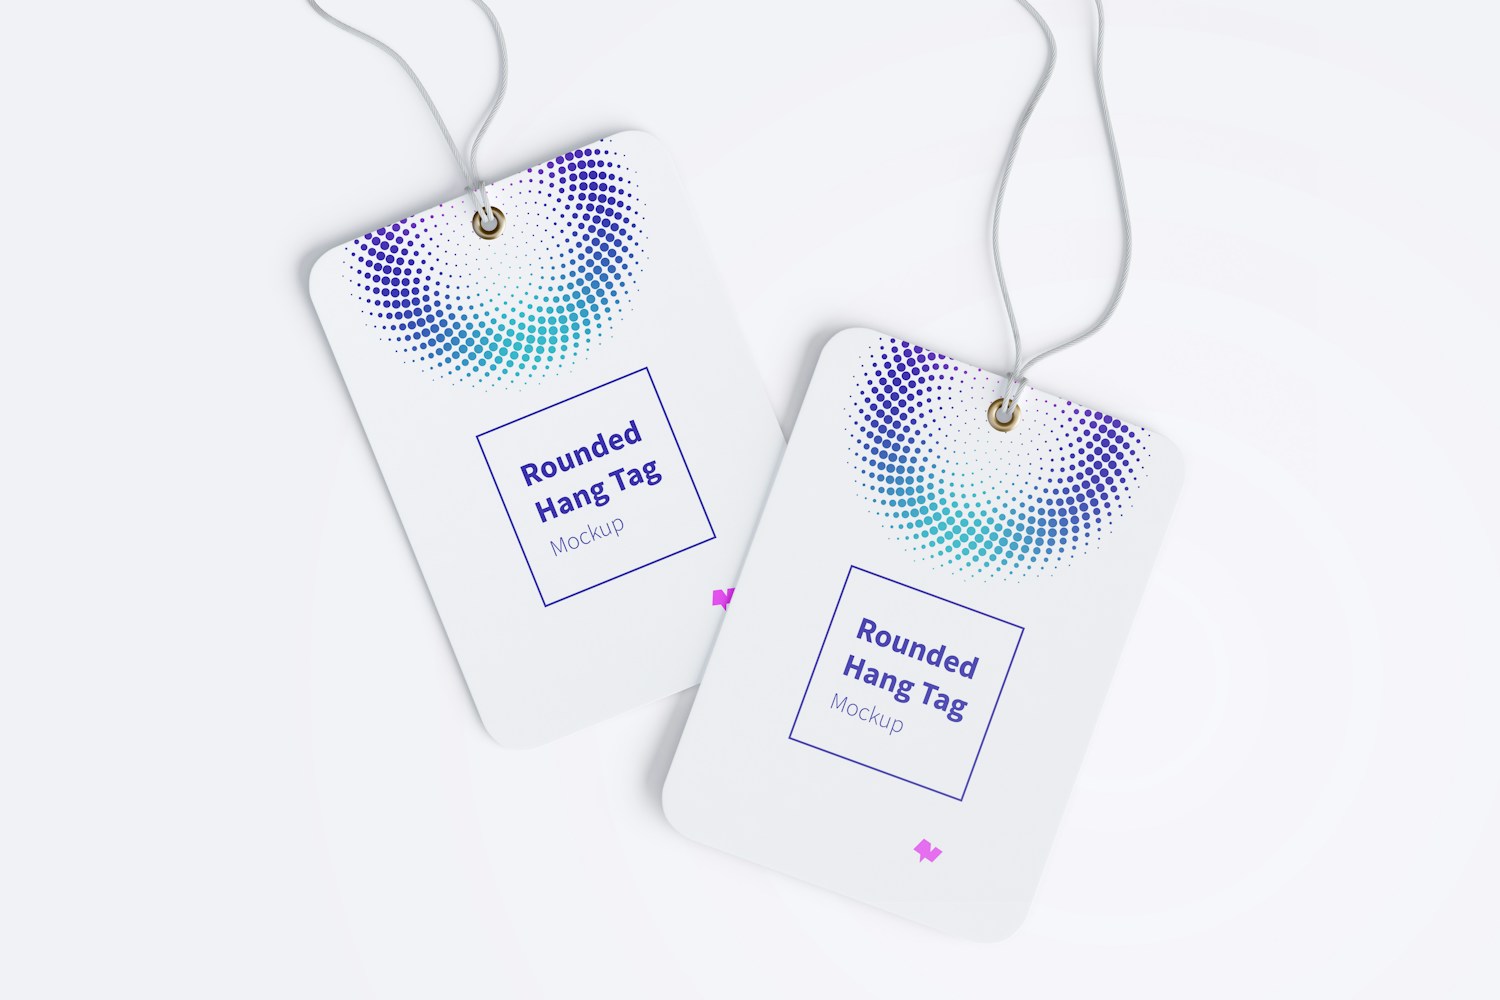 Rounded Hang Tags Mockup with String, Two-sided